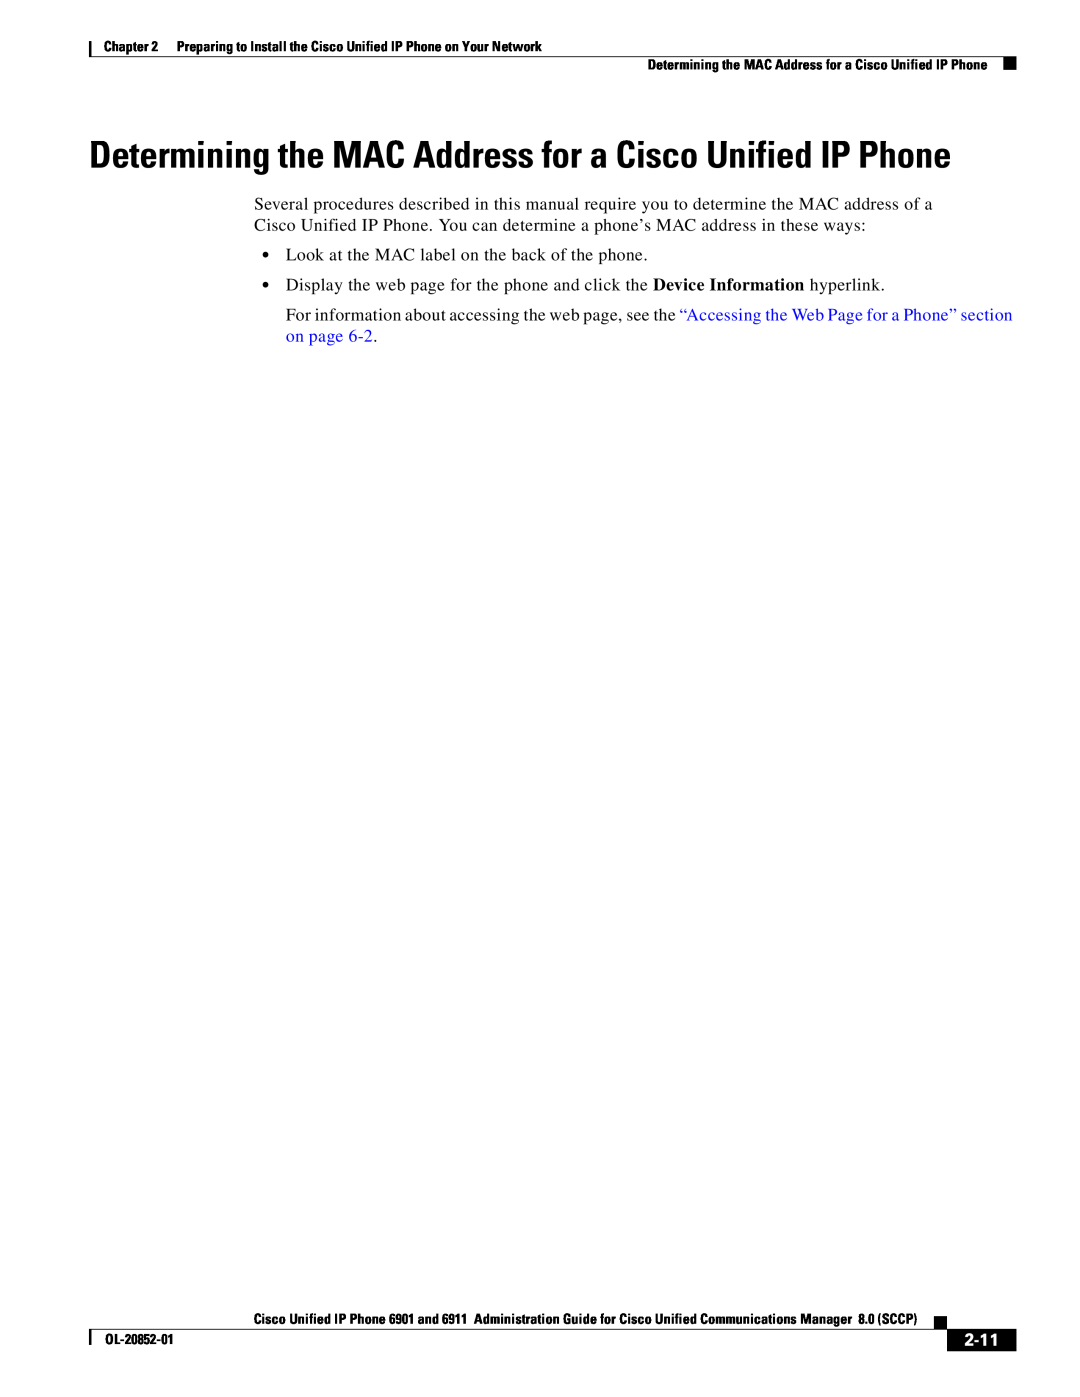 Cisco Systems 691 manual 2-11, Determining the MAC Address for a Cisco Unified IP Phone 